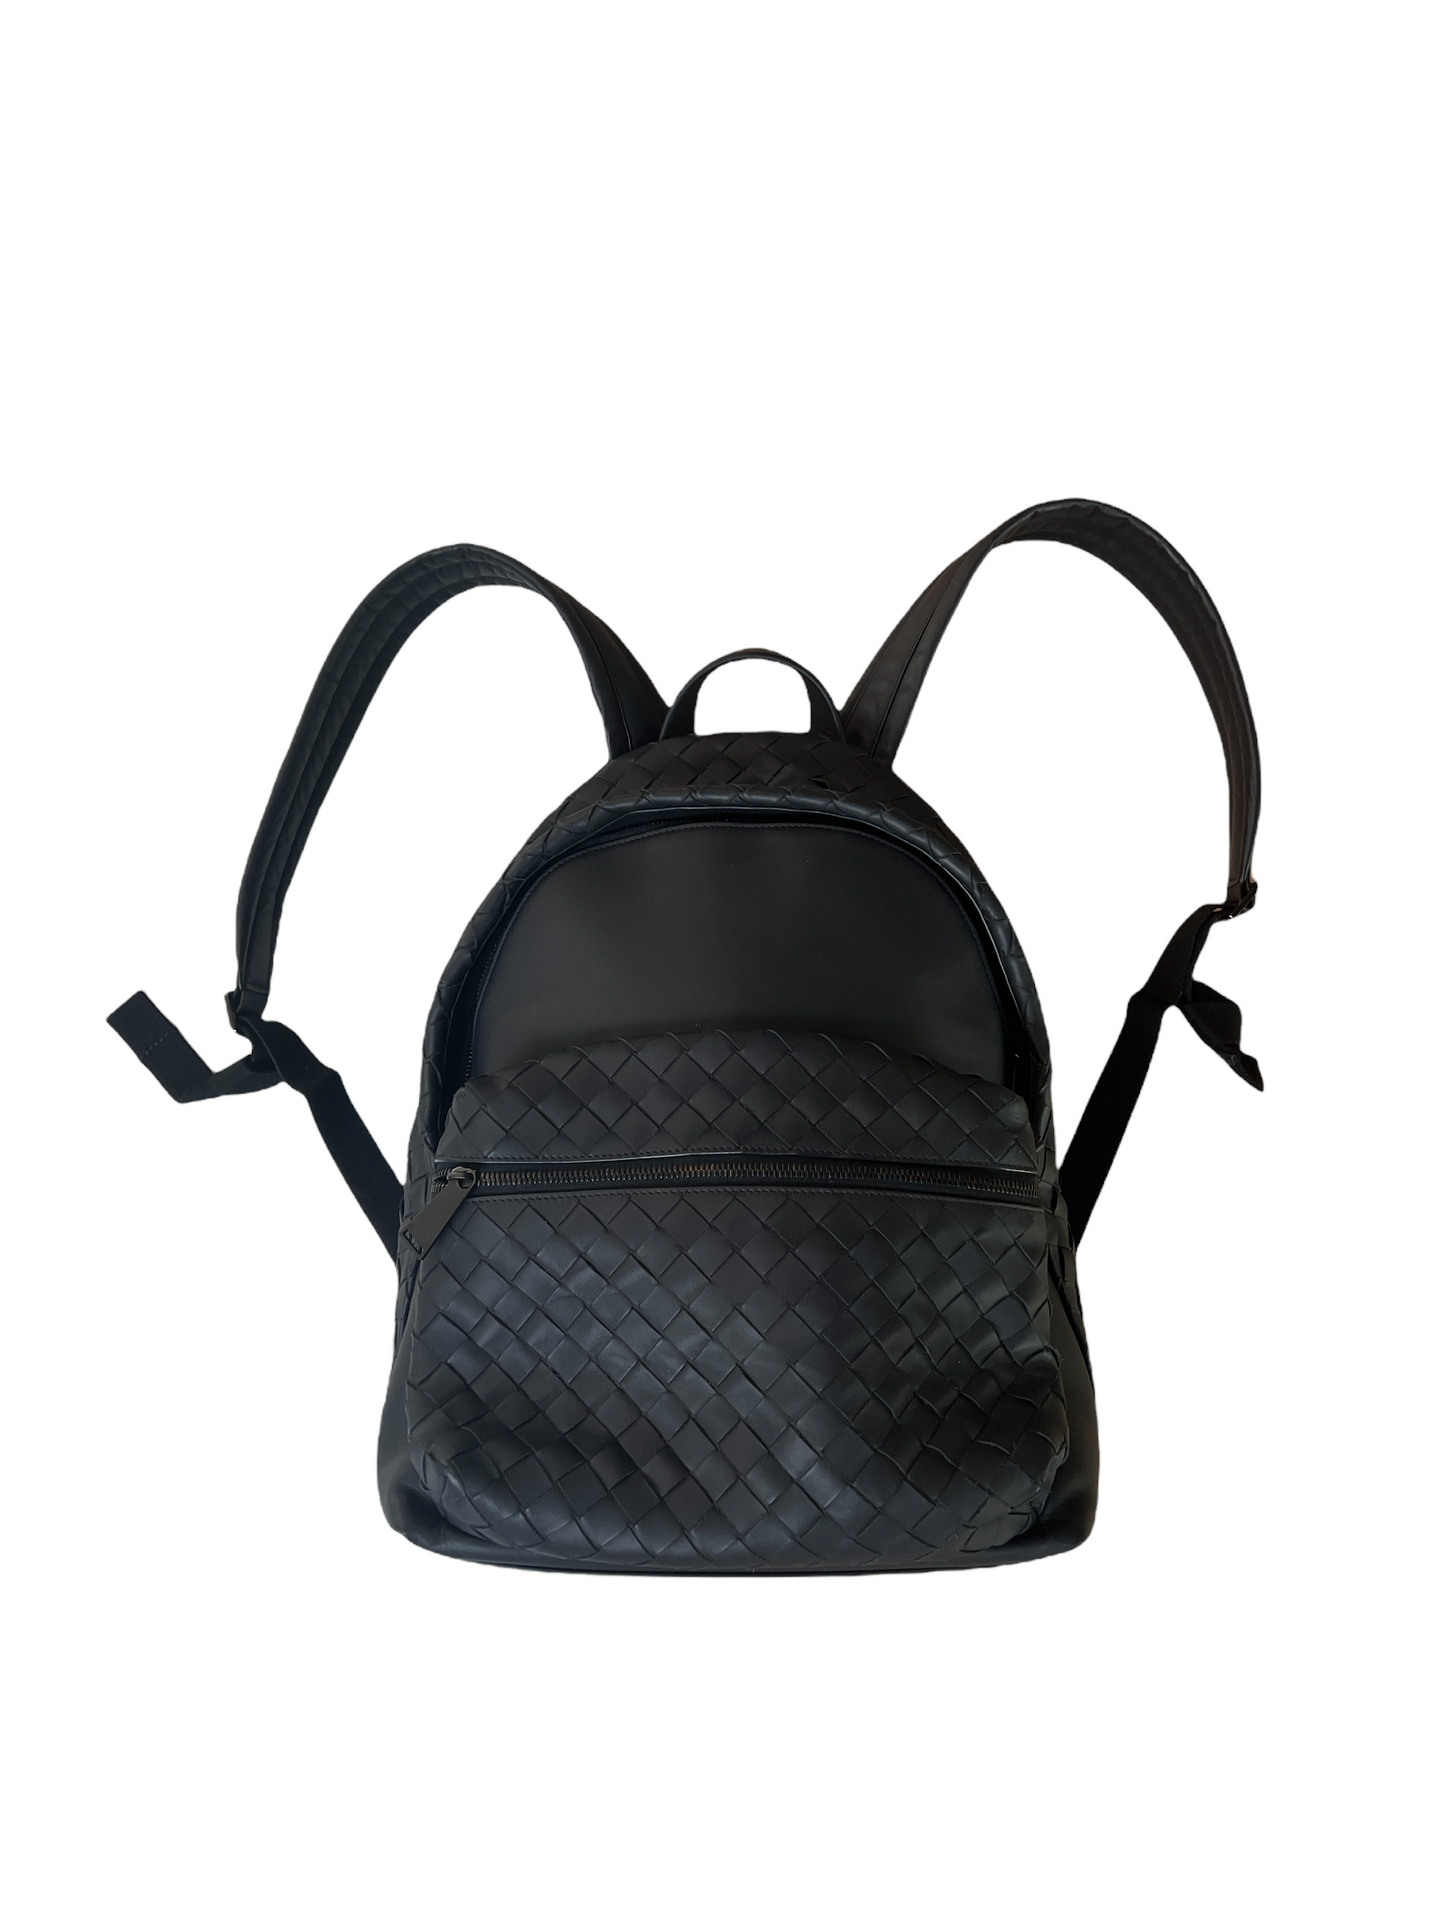 Intrecciato Leather Backpack